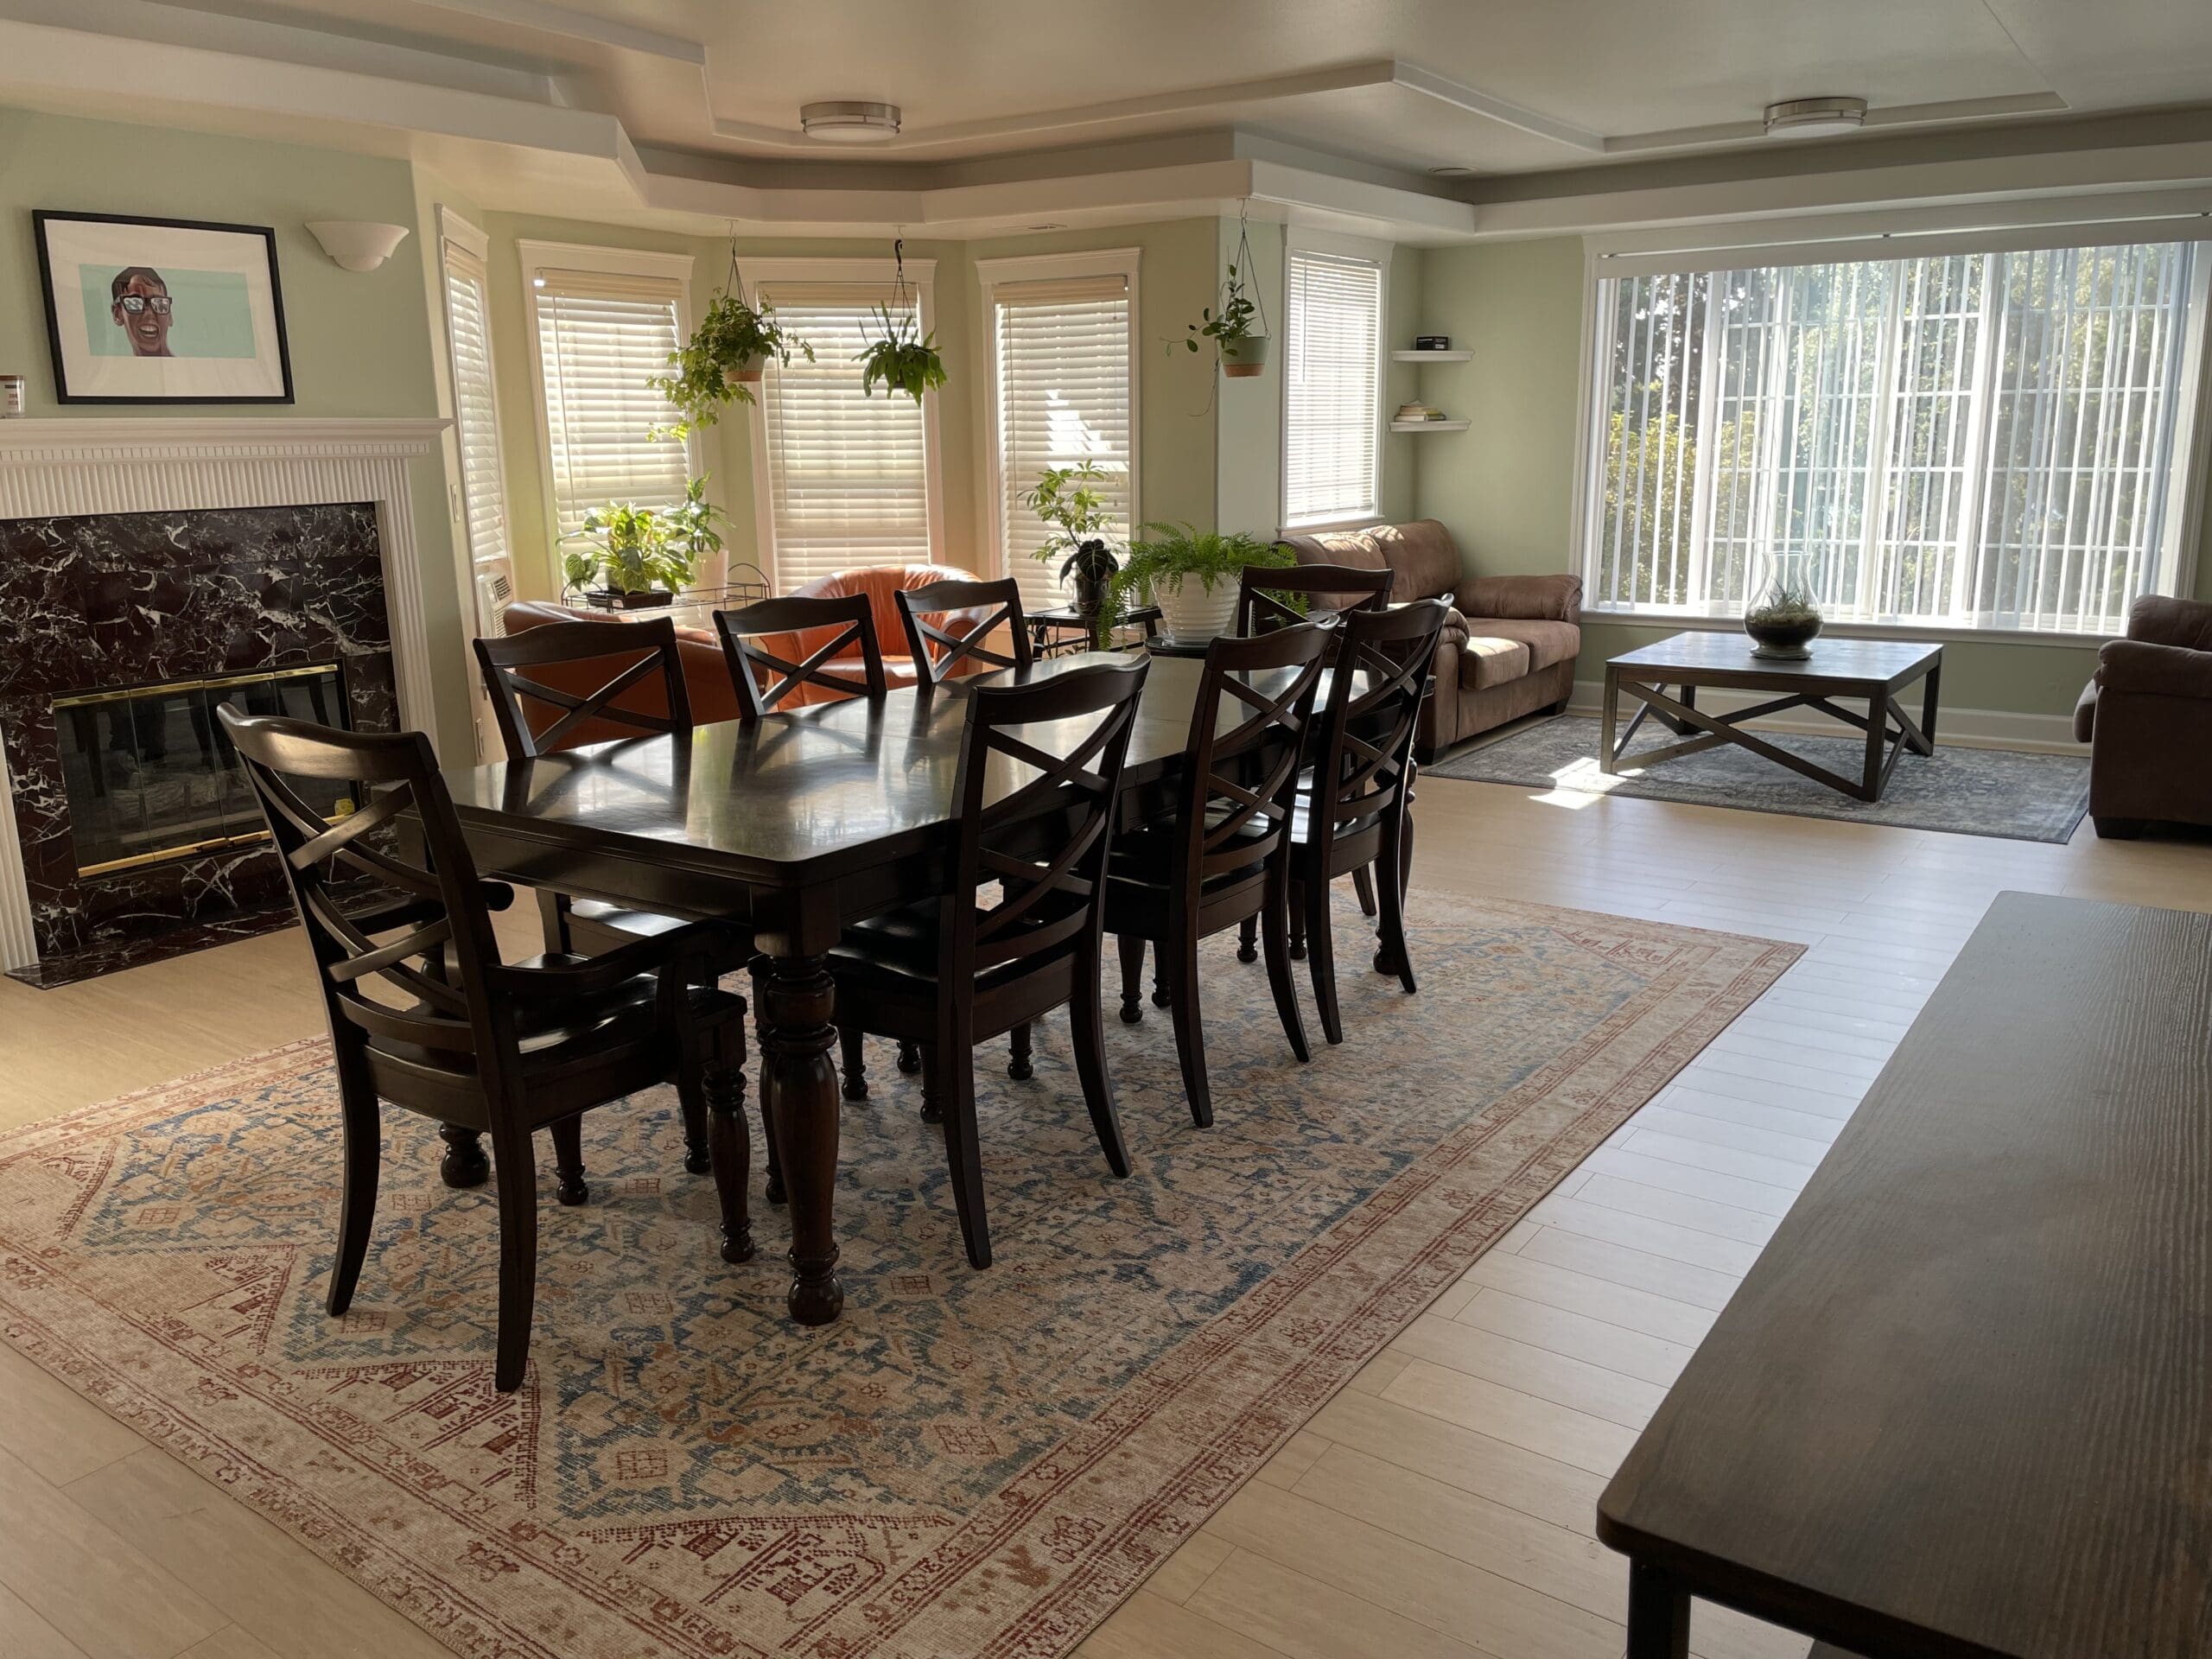 Seattle sober living home for men for addiction recovery - living room - dining table